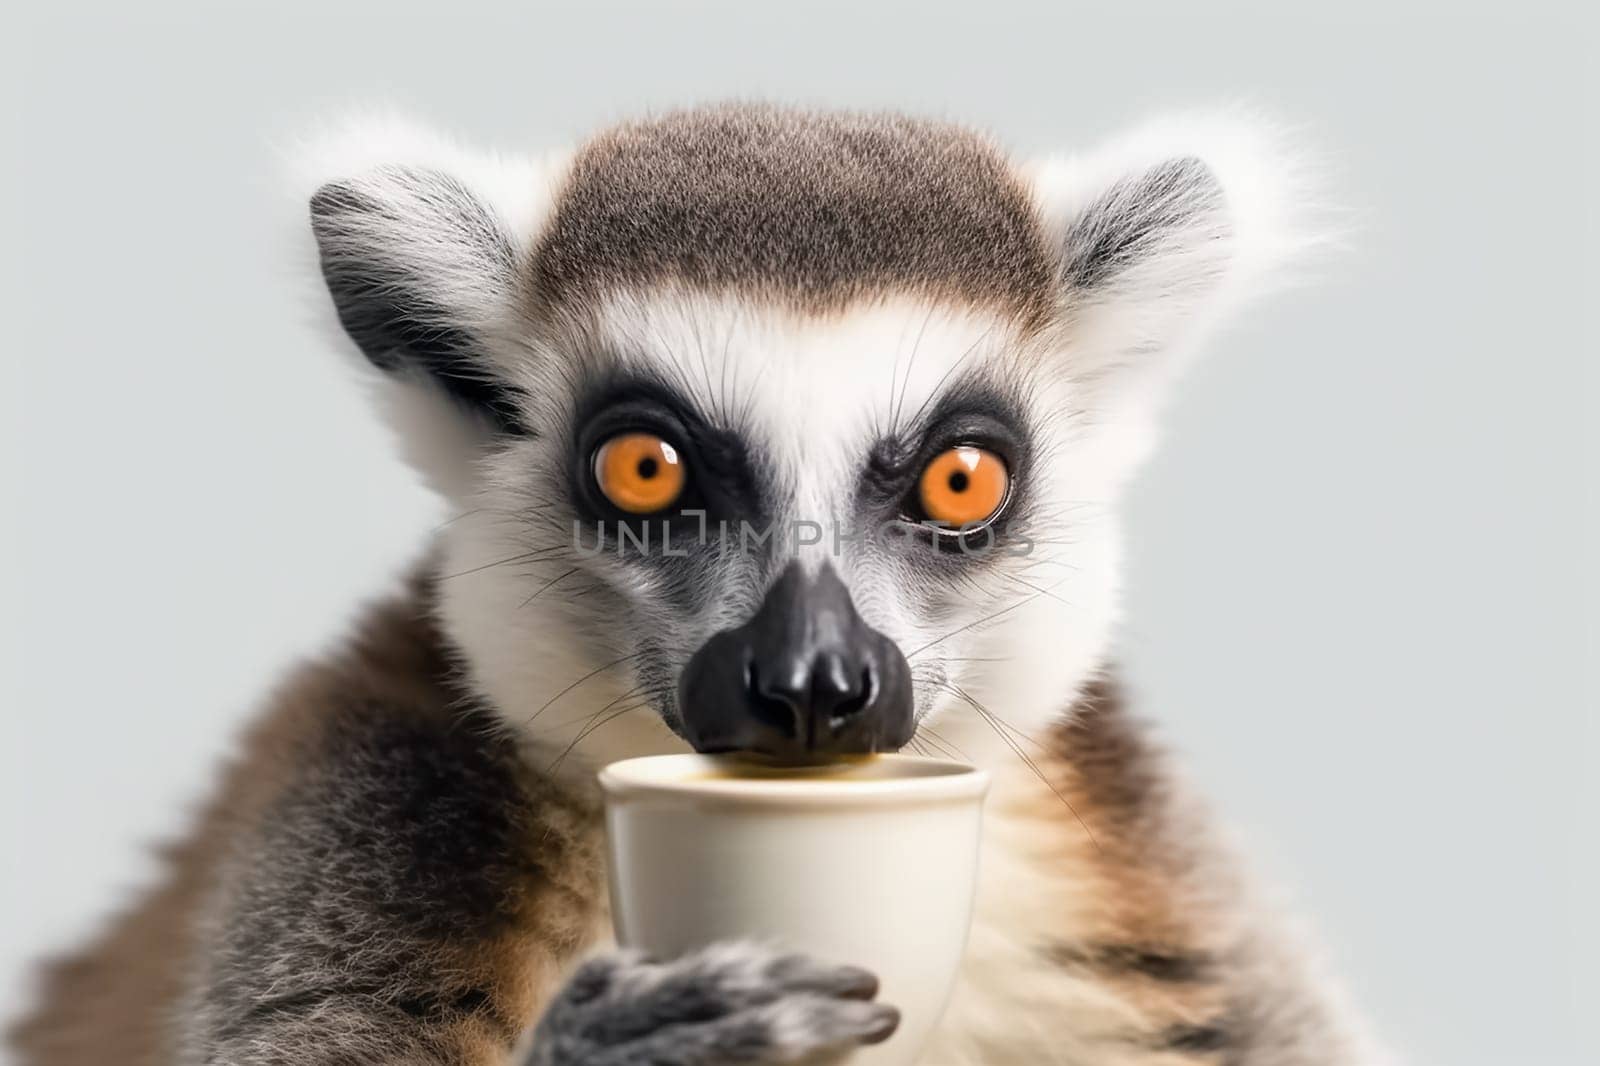 Portrait of a funny lemur drinking coffee from a paper cup and looking at the camera. Portrait of Ring-tailed lemur with big yellow eyes close up by esvetleishaya